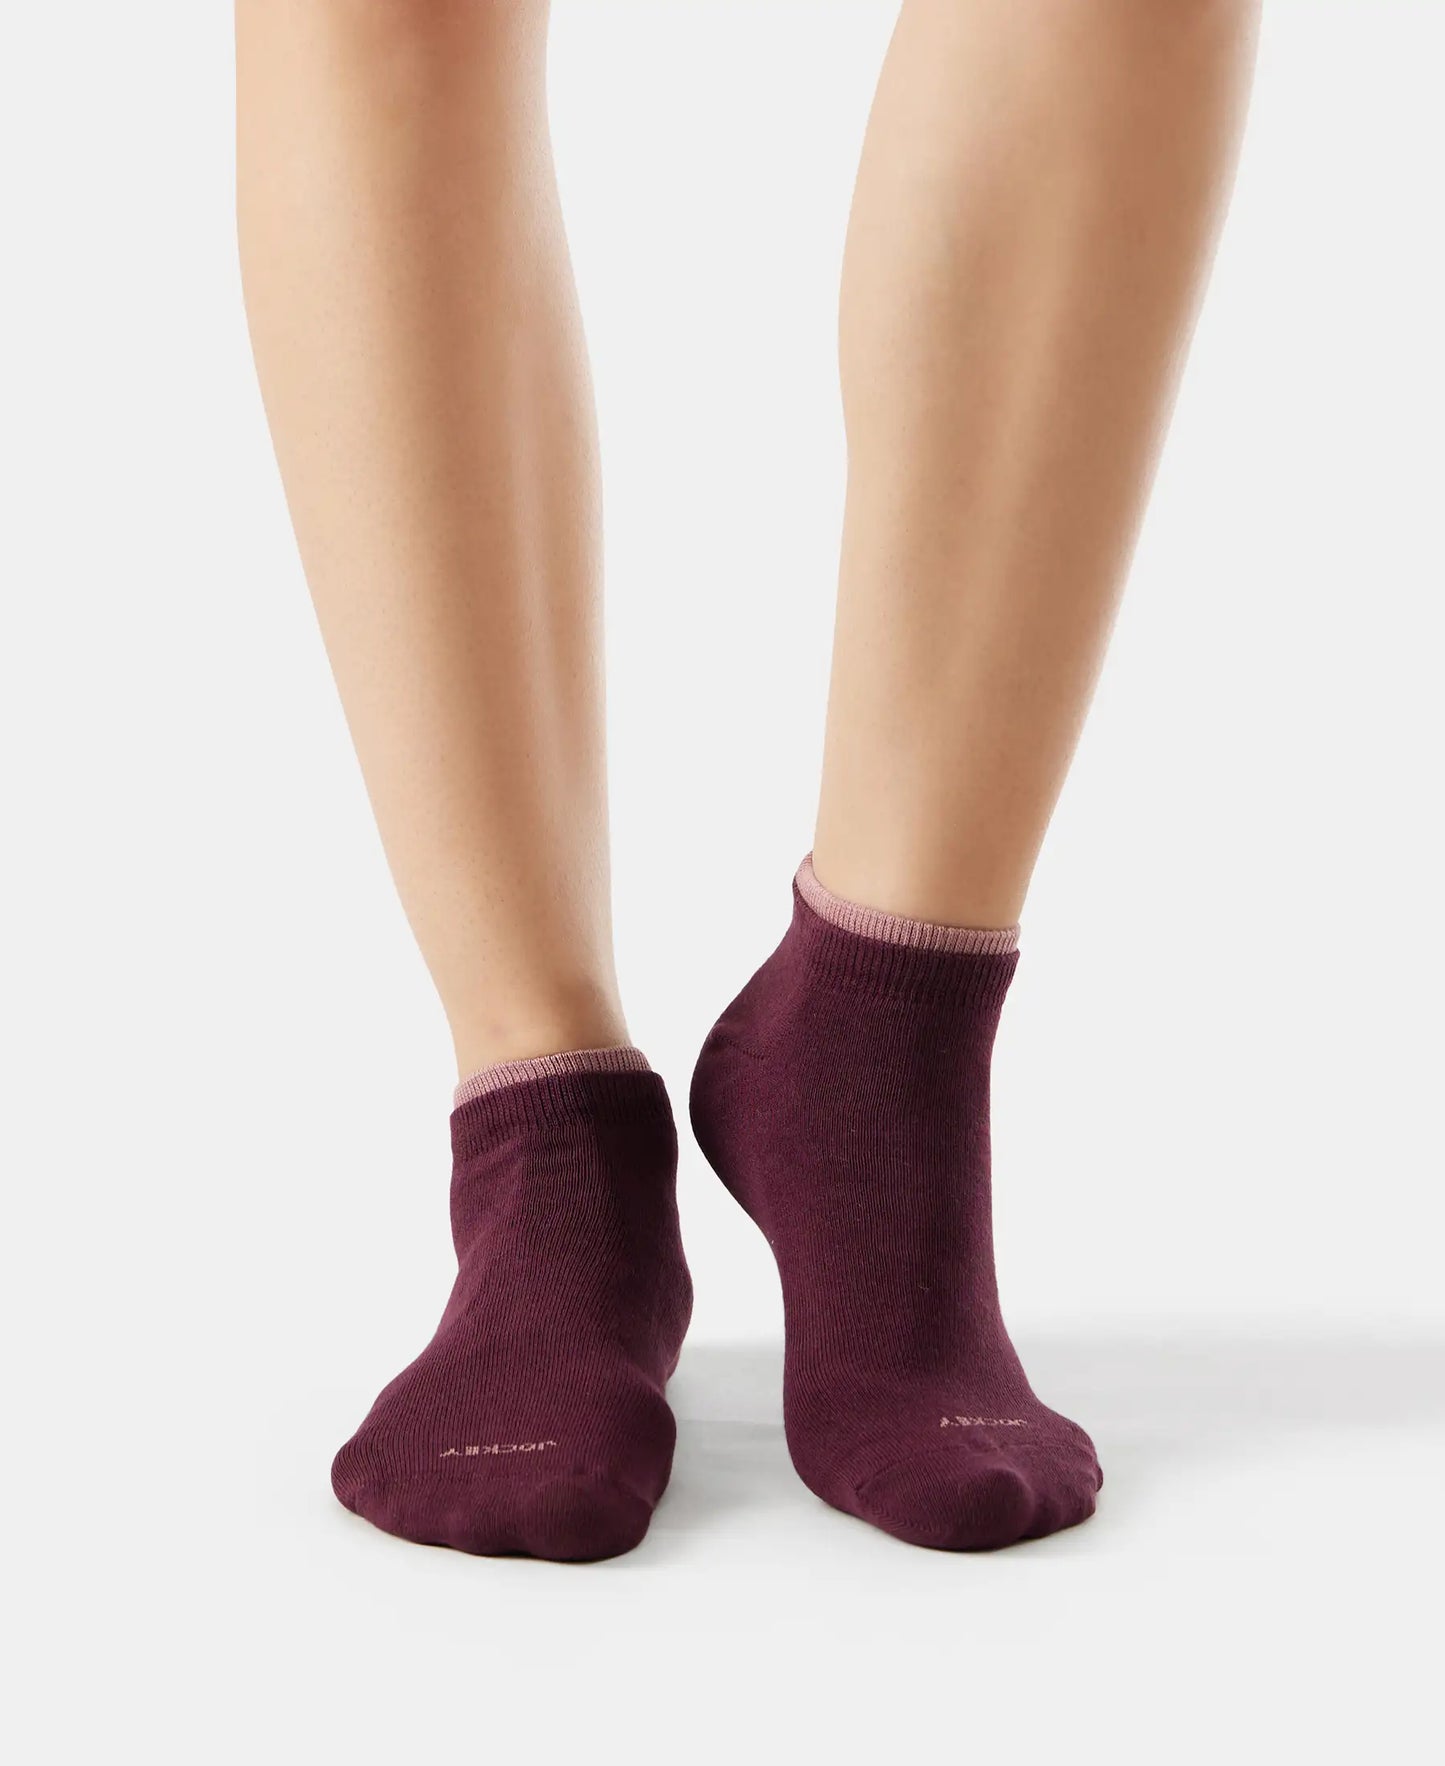 Compact Cotton Stretch Solid Low Show Socks with StayFresh Treatment - Wistful mauve & Wine Tasting-2